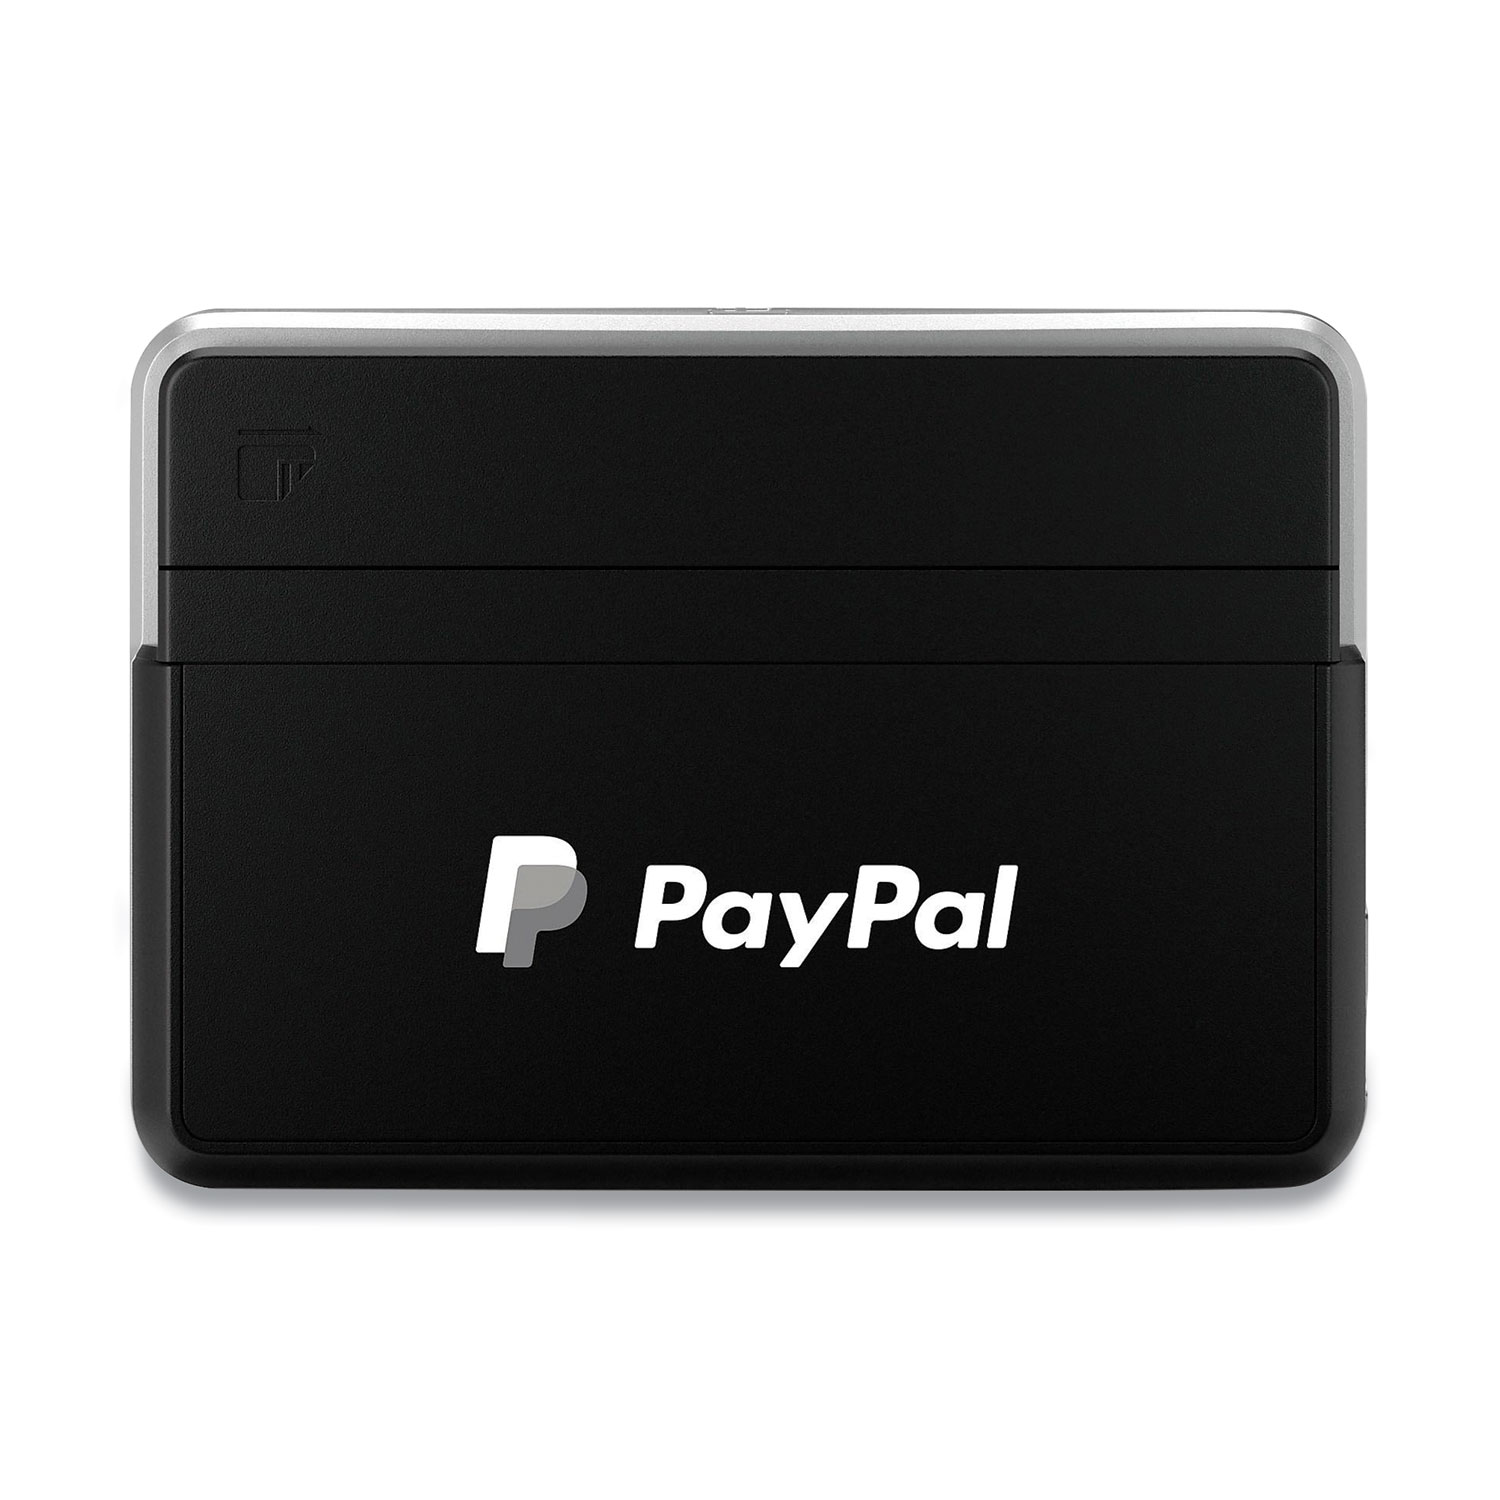  PayPal PP-8151882 Chip and Swipe Mobile Bluetooth Card Reader, Black (NAX2774176) 